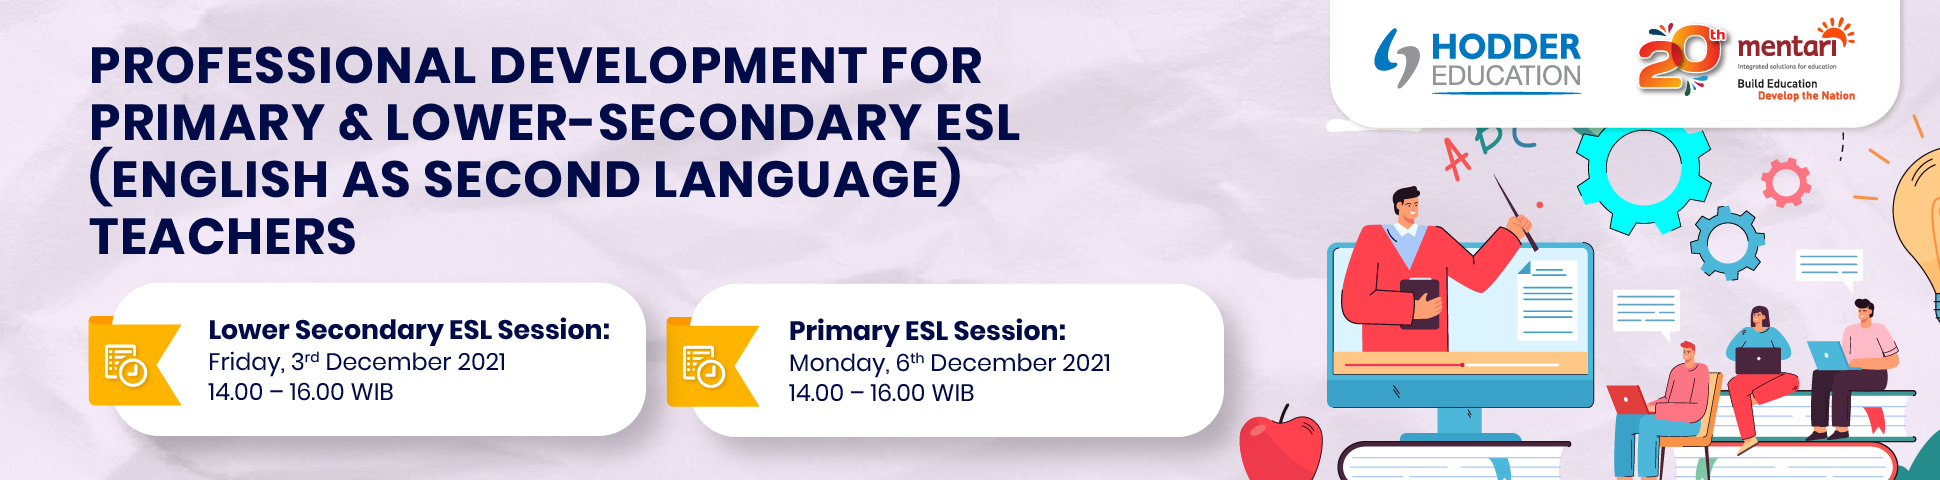 Professional Development for Primary & Lower-Secondary ESL (English as Second Language) Teachers